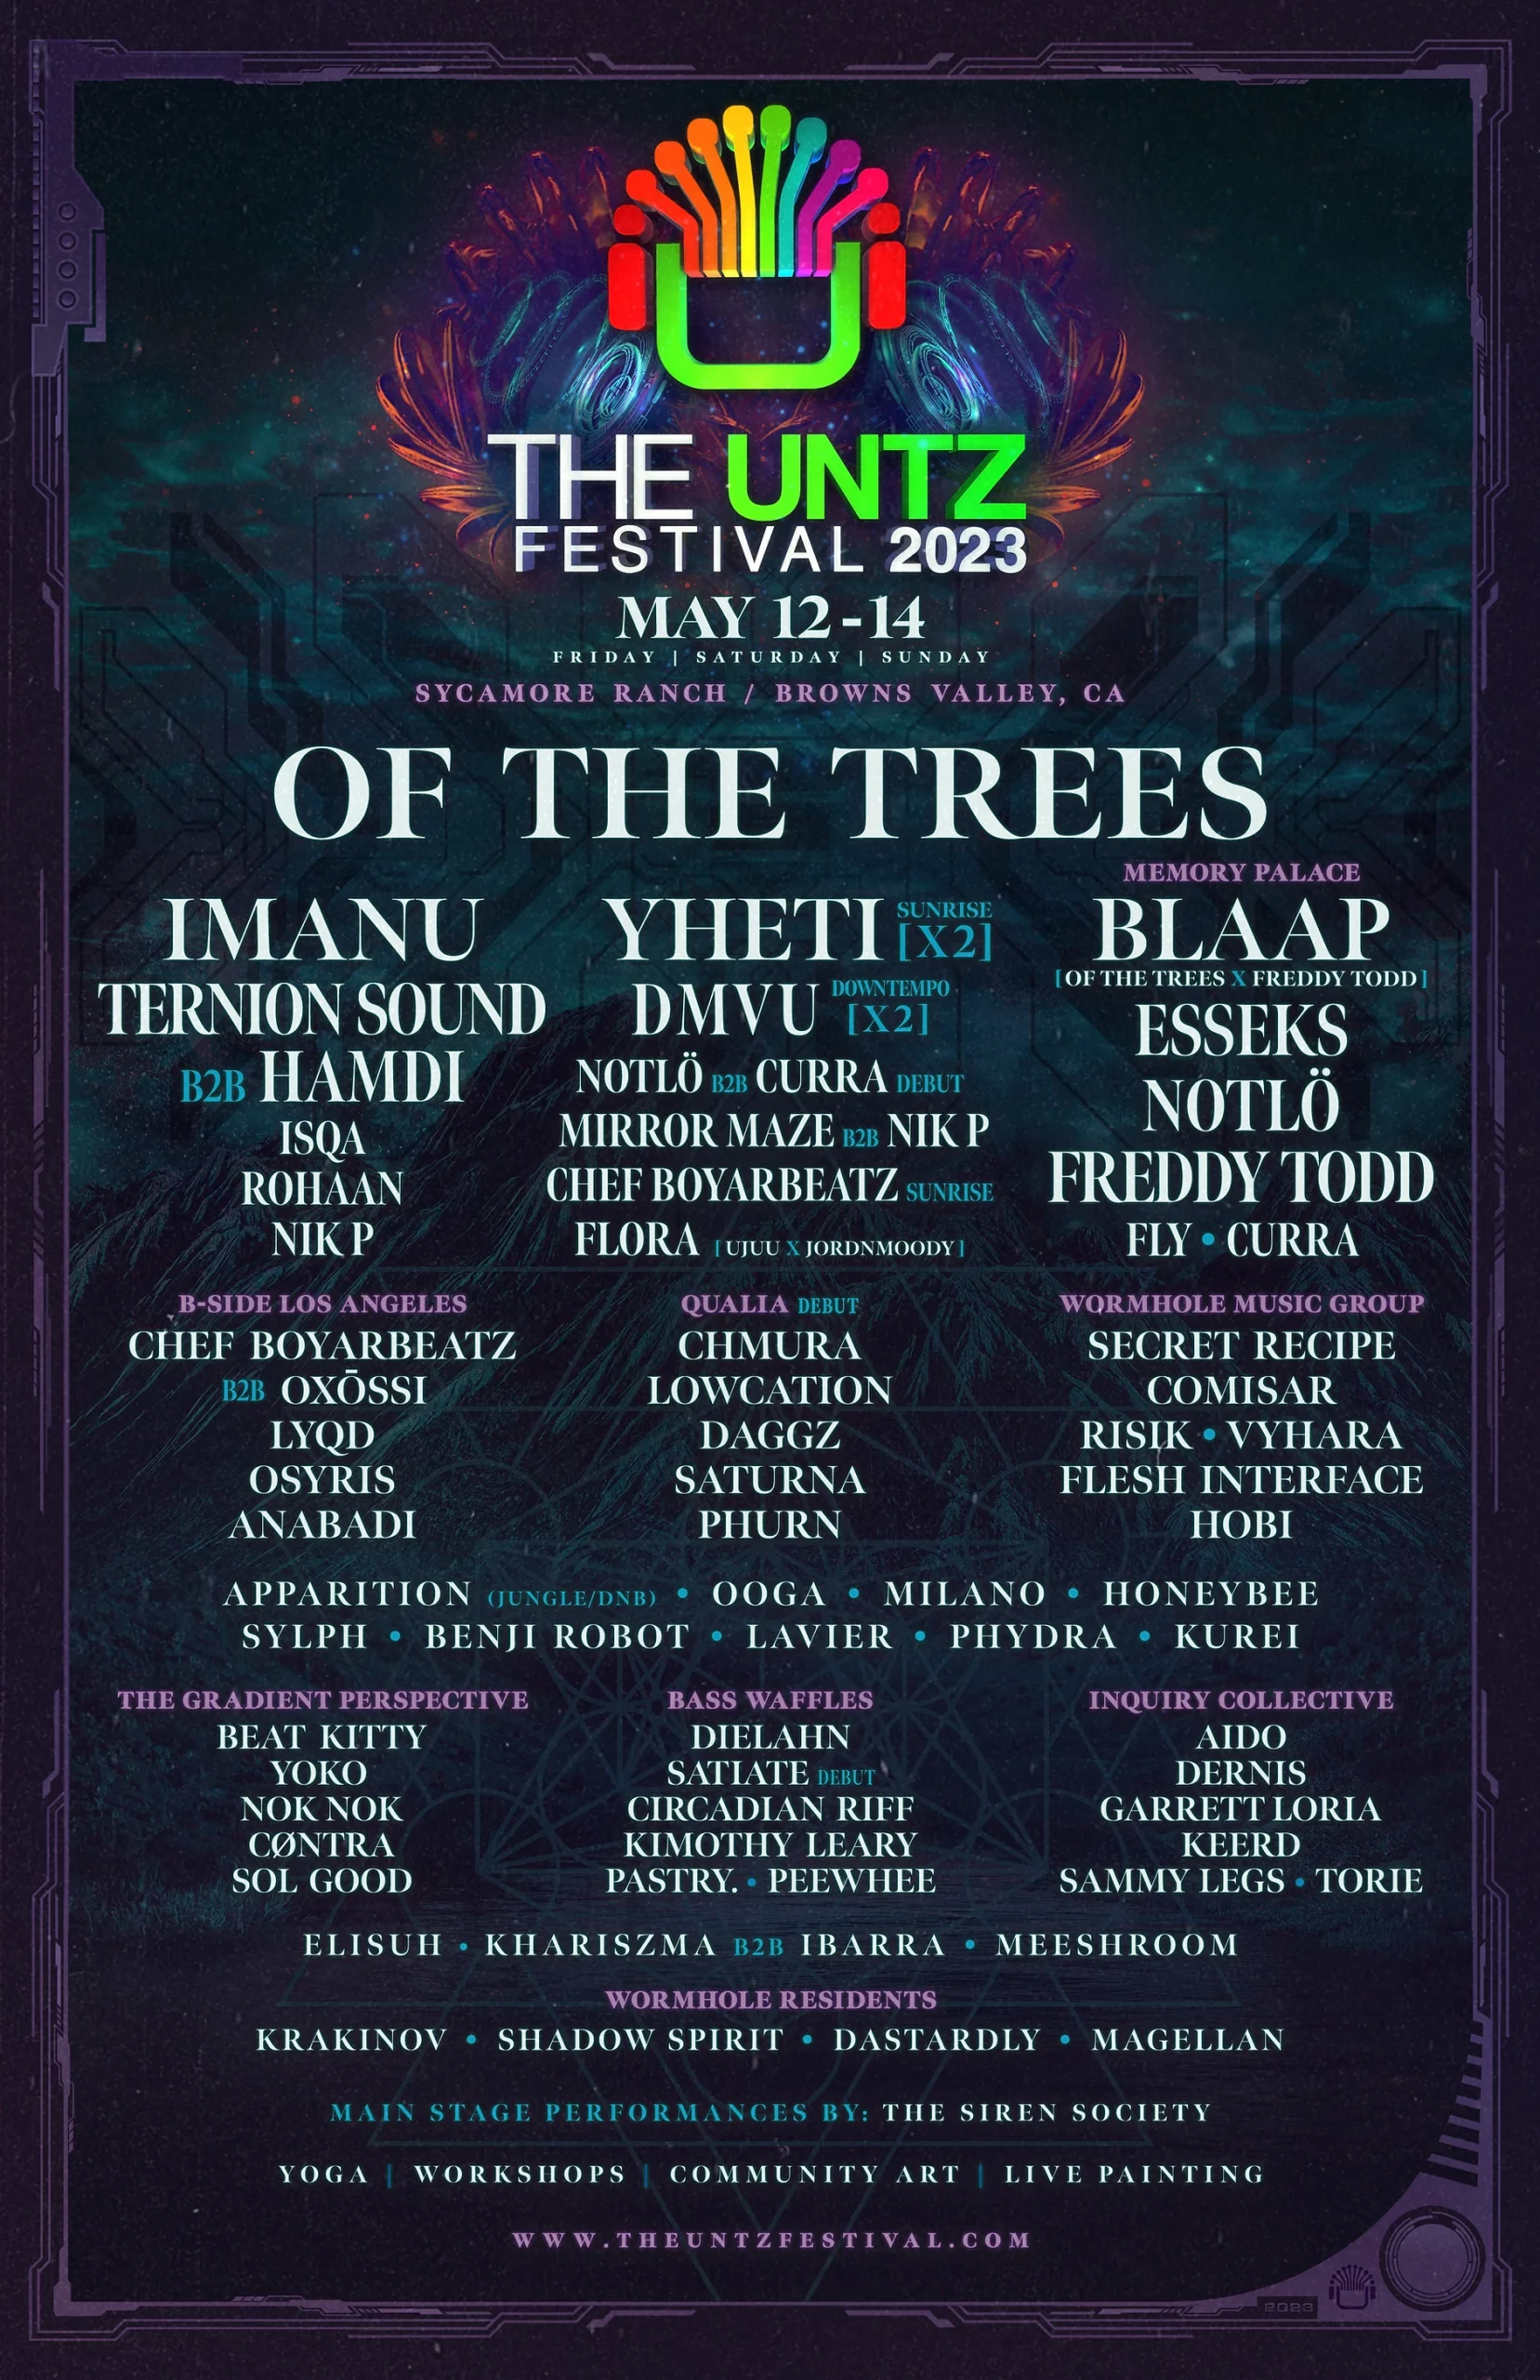 The Untz Festival Lineup headlined by Of The Trees